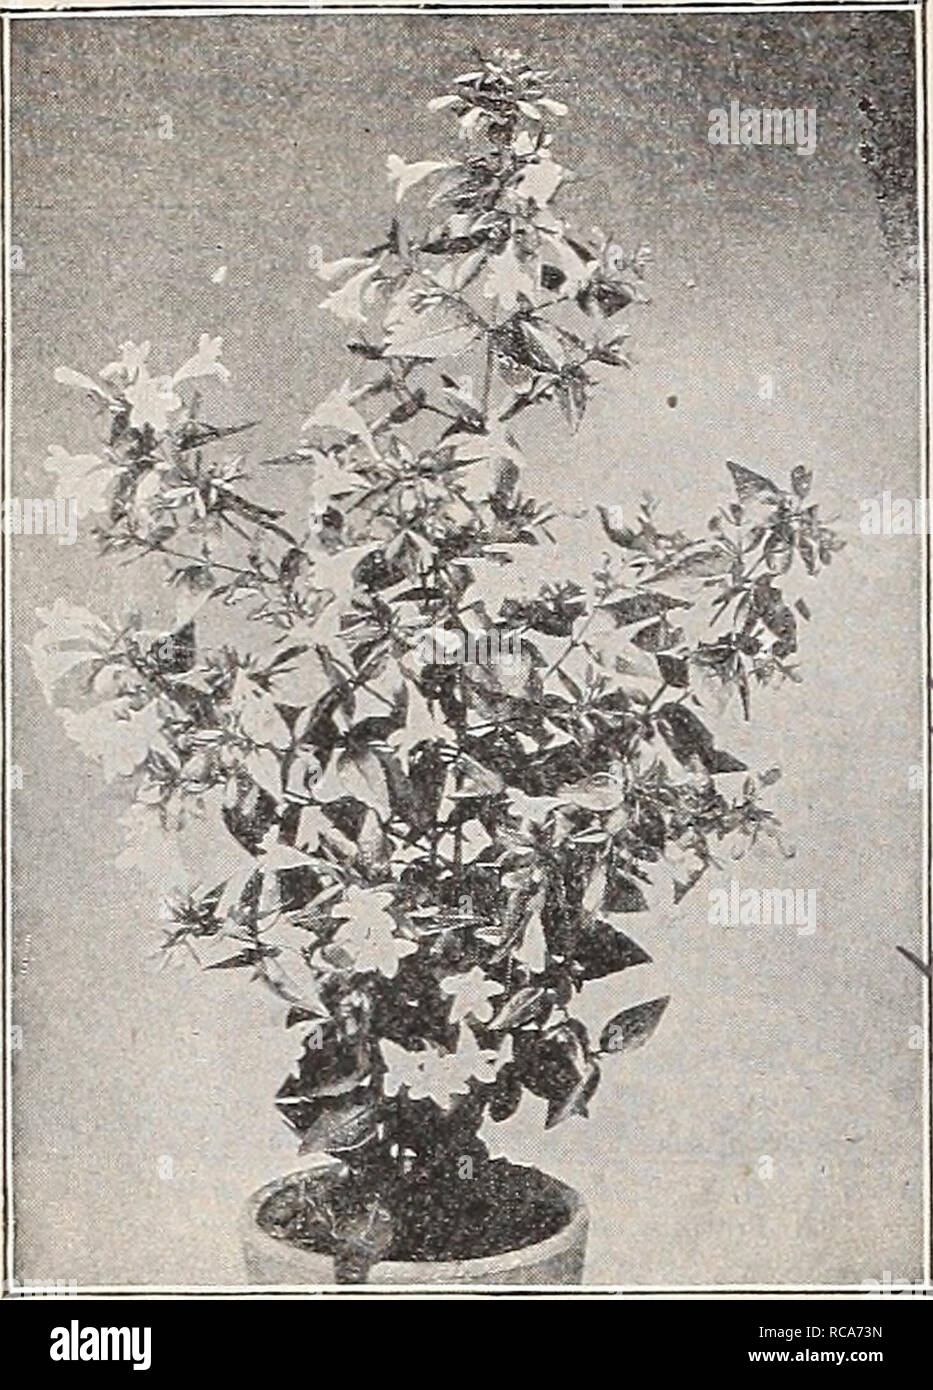 . Dreer's garden book : 1906. Seeds Catalogs; Nursery stock Catalogs; Gardening Equipment and supplies Catalogs; Flowers Seeds Catalogs; Vegetables Seeds Catalogs; Fruit Seeds Catalogs. Abelia Chinensis Gkandiflora. ABELIA. Chinensis Qrandiflora. A choice dwarf, small shrub of graceful habit, hardy as far nortli Oi Philadelphia, but requiring protection further north. It produces through the entire summer and fall months white tinted lilac heather- like flowers in such abundance as to completely cover the plant. 30 cts. each ; $3.00 per doz. ABUTILONS. Arthur Belsham. Orange-red with deeper ve Stock Photo